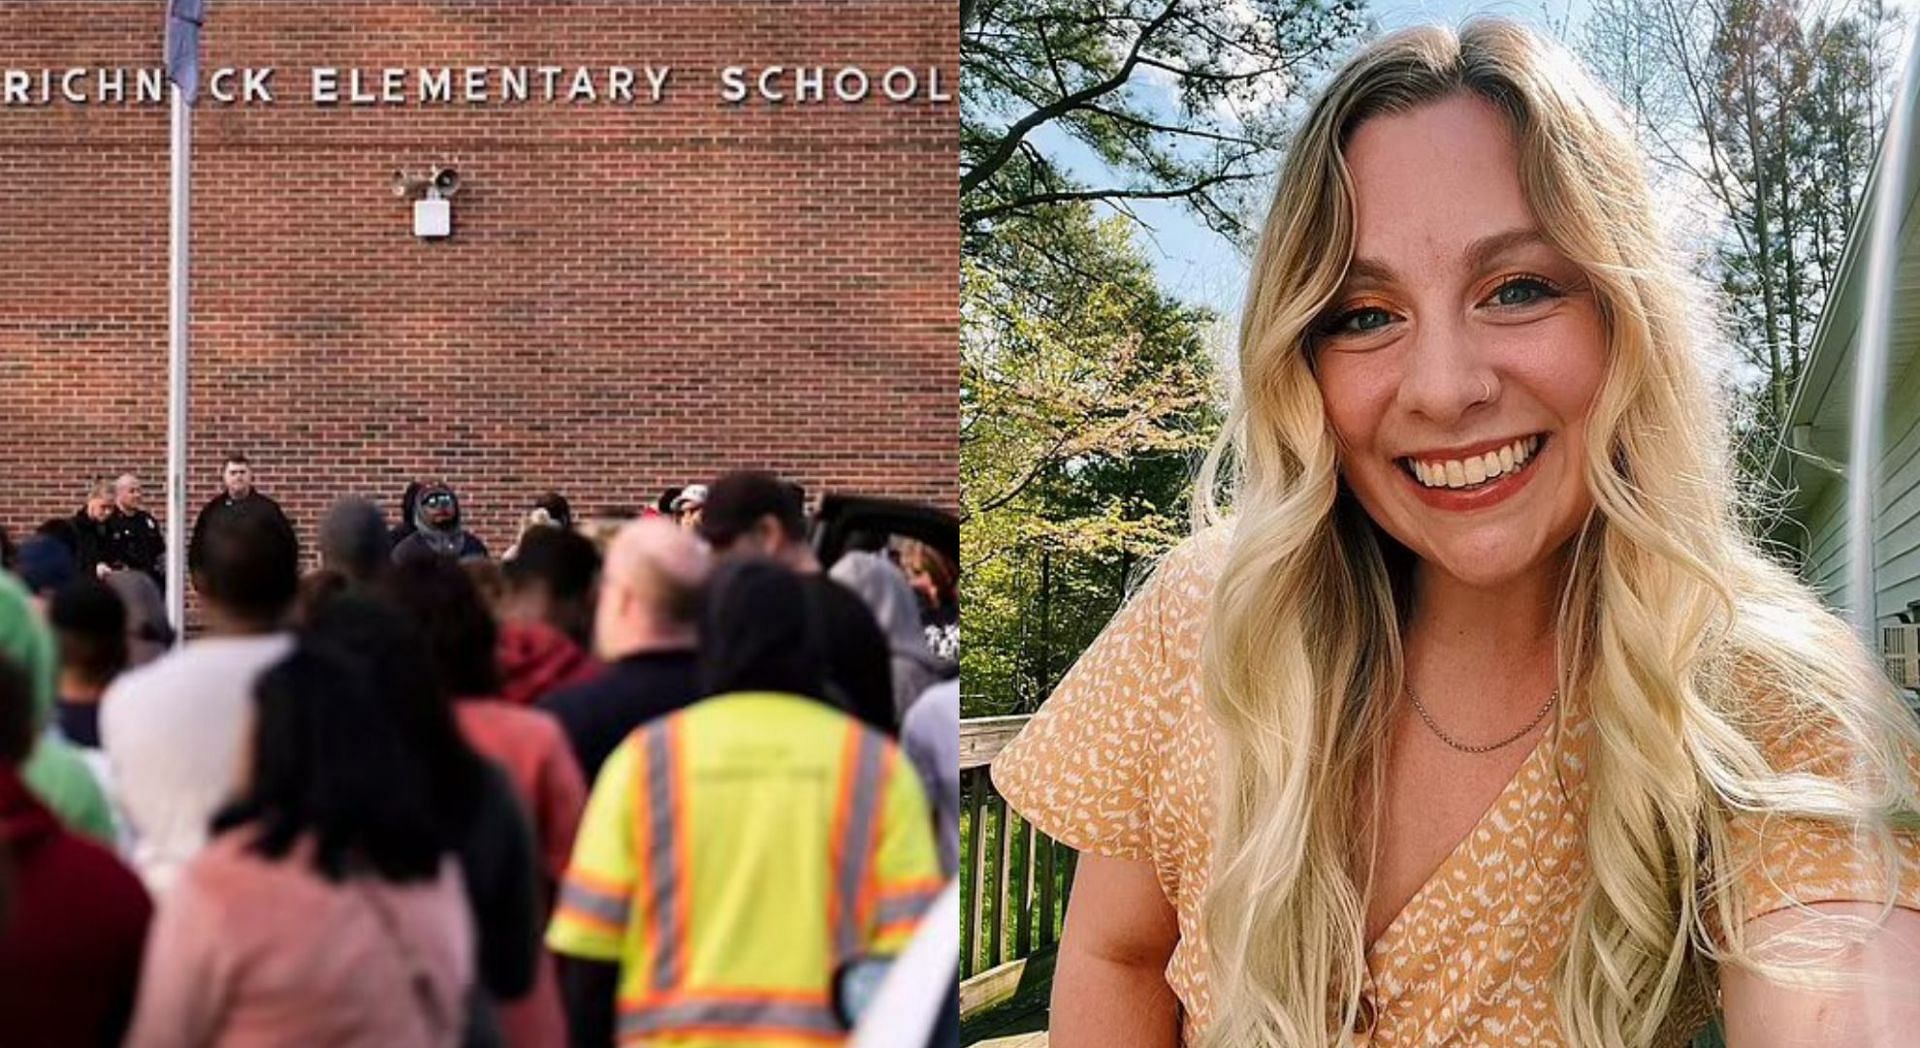 The Virginia teacher shot by a 6 year old student has been identified as Abby Zwerner (Image via Mike Sington/Twitter and Abby Zwerner/Facebook)